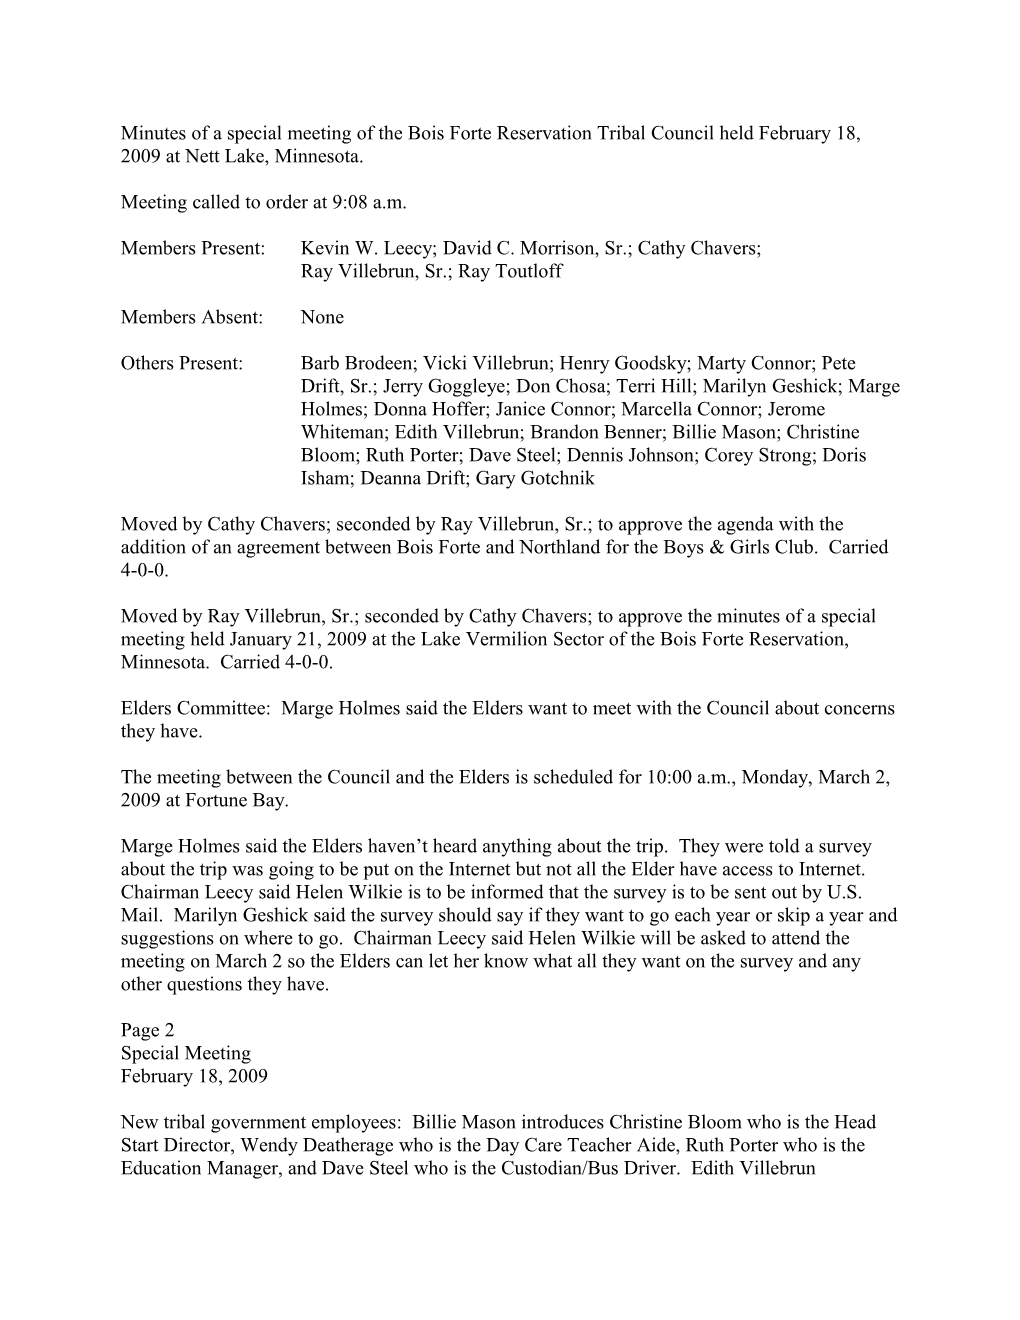 Minutes of a Special Meeting of the Bois Forte Reservation Tribal Council Held February